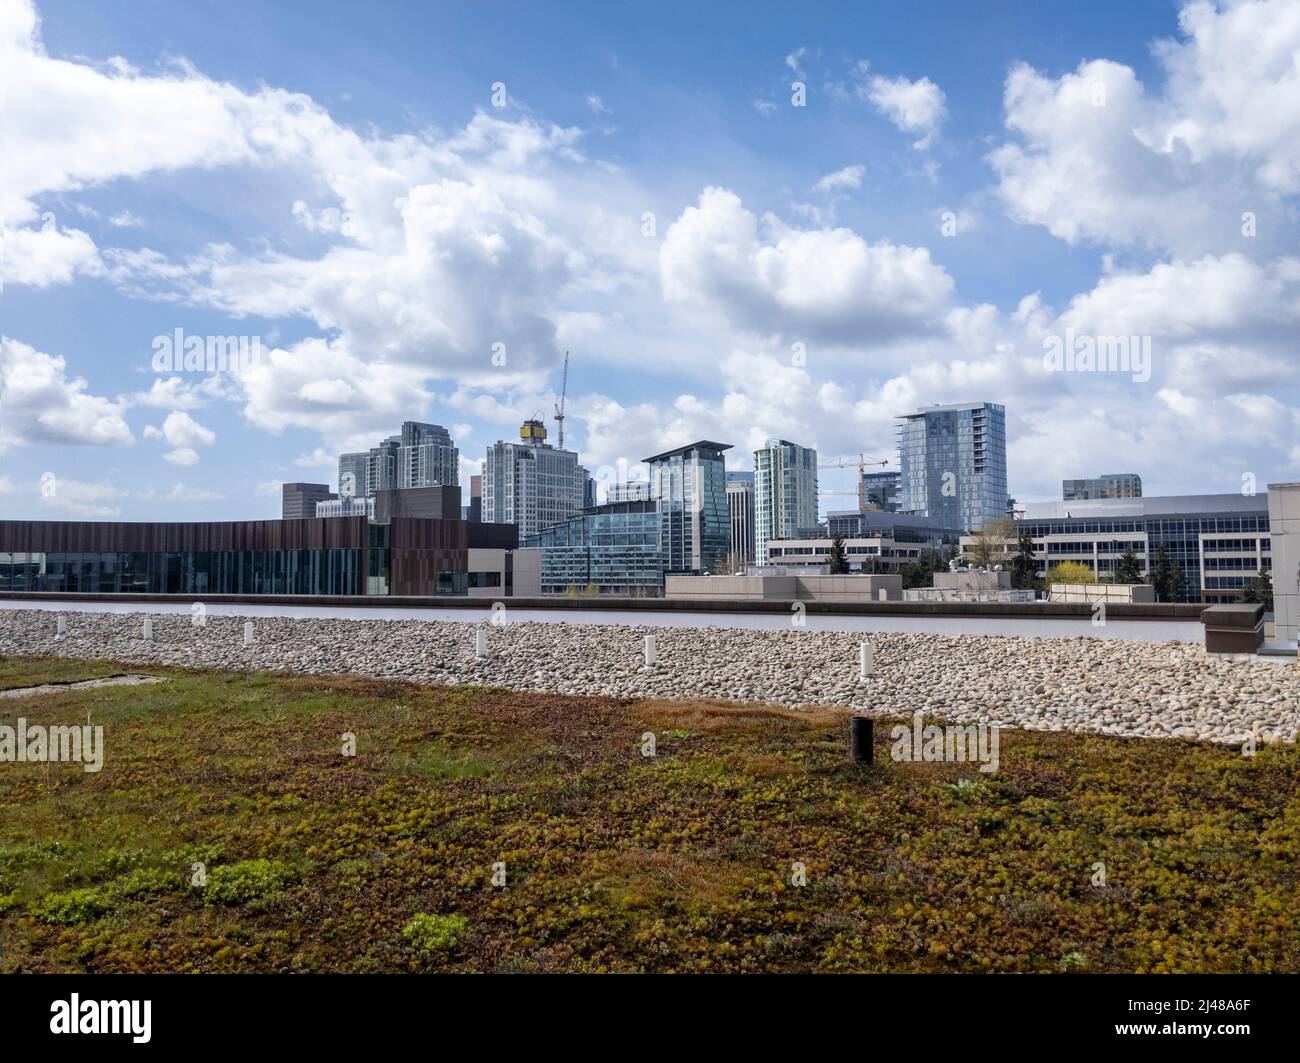 Bellevue, WA USA - circa April 2022: Wide angle view of construction happening in downtown Bellevue on a bright, cloudy day Stock Photo